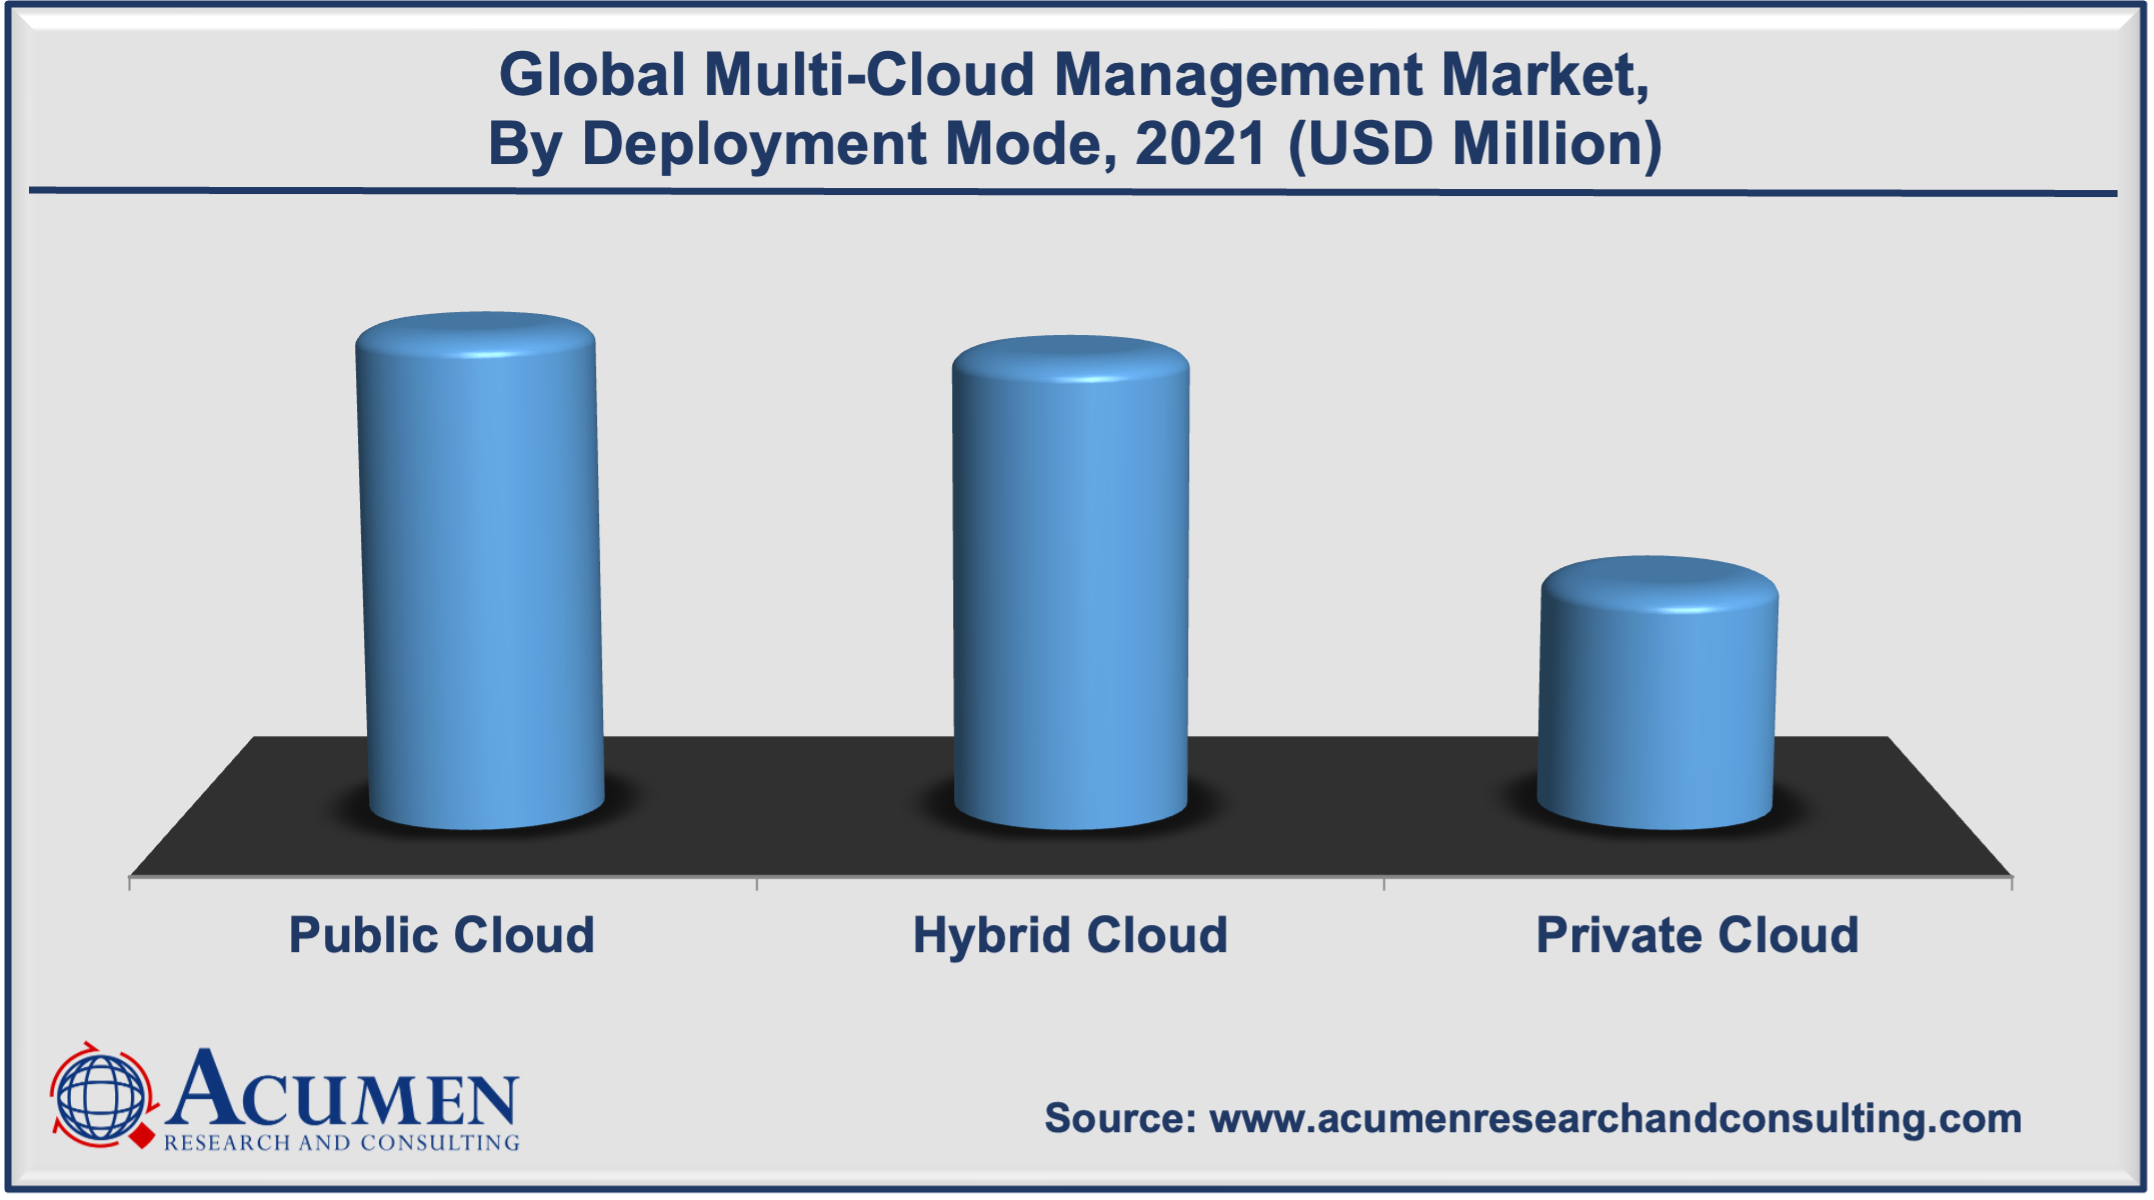 Multi-Cloud Management Market Share was accounted for USD 4,585 Million in 2021 and is estimated to reach the market value of USD 49,894 Million by 2030.